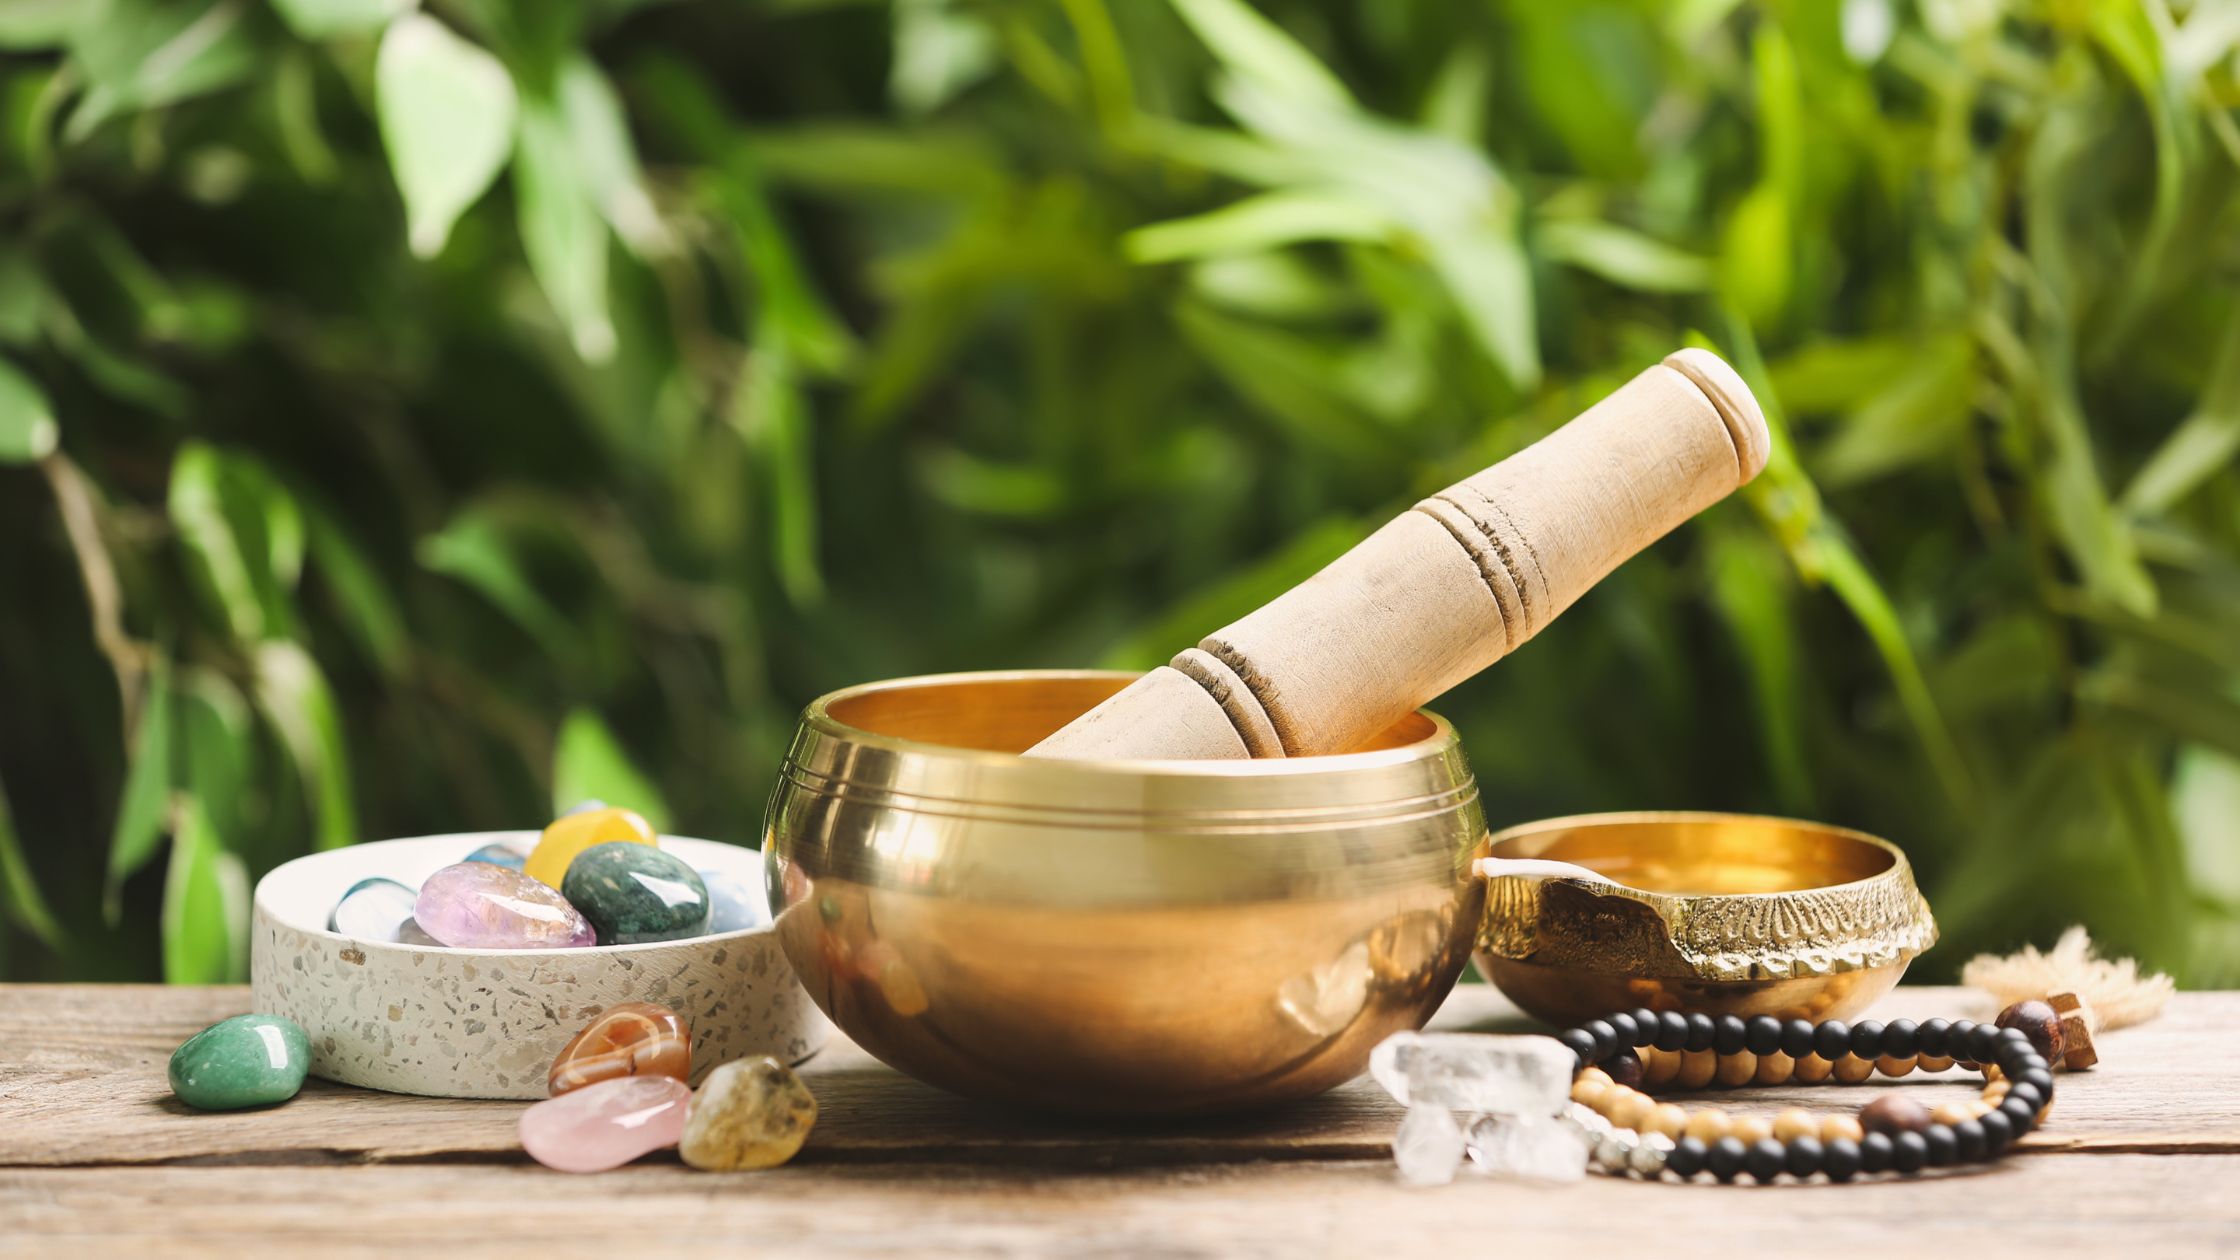 bronze singing bowl with mala beads and bamboo background